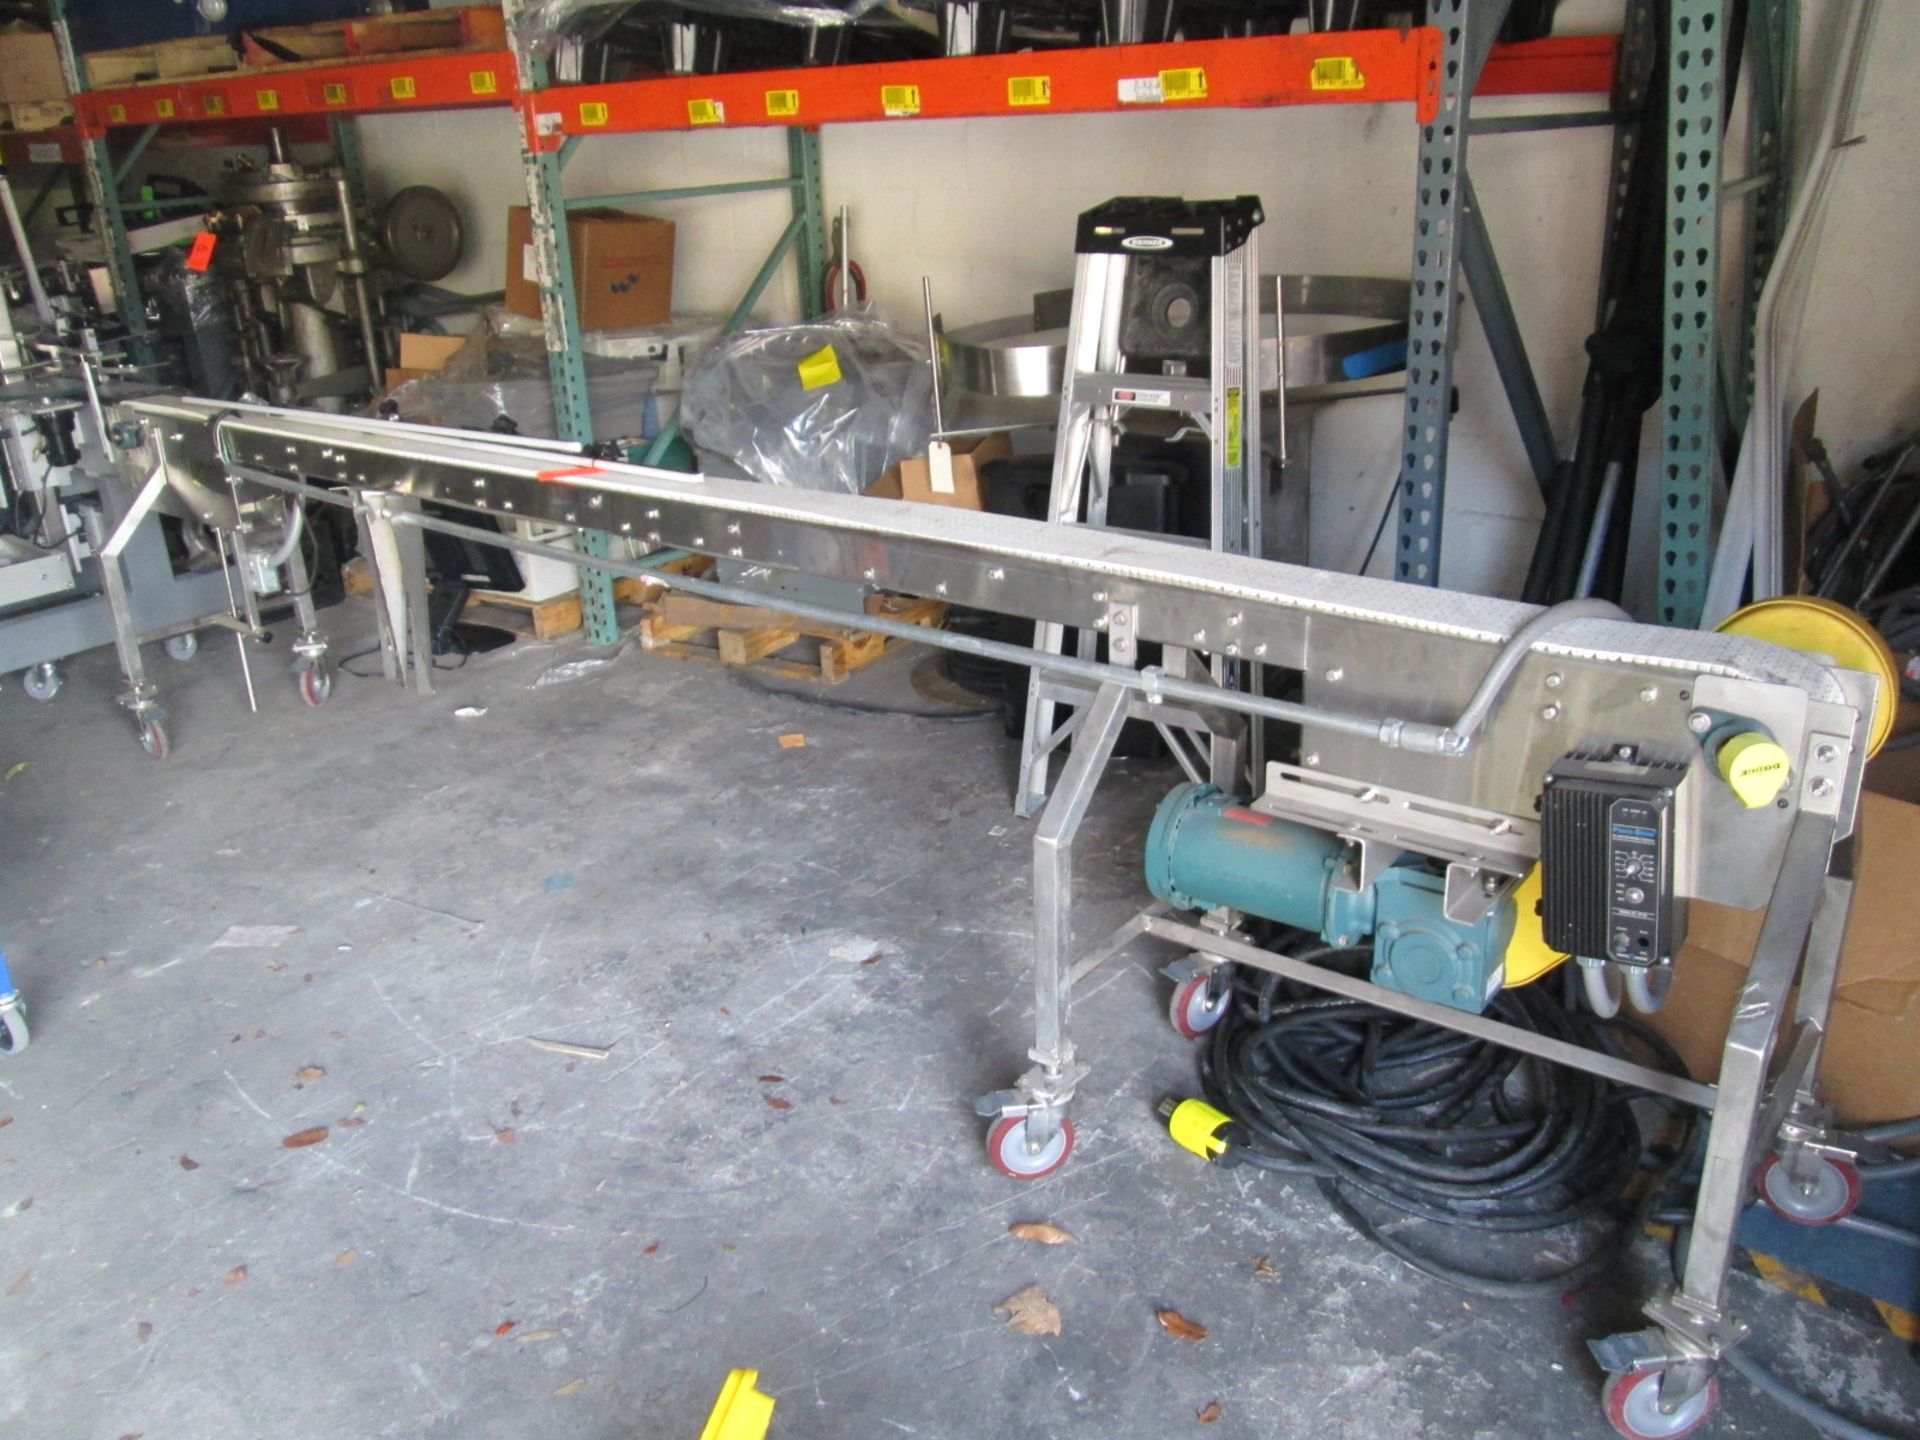 Stainless Steel Conveyor Section, Mfg by Multiconveyor Inc, 5" wide long, on wheels, equipped with